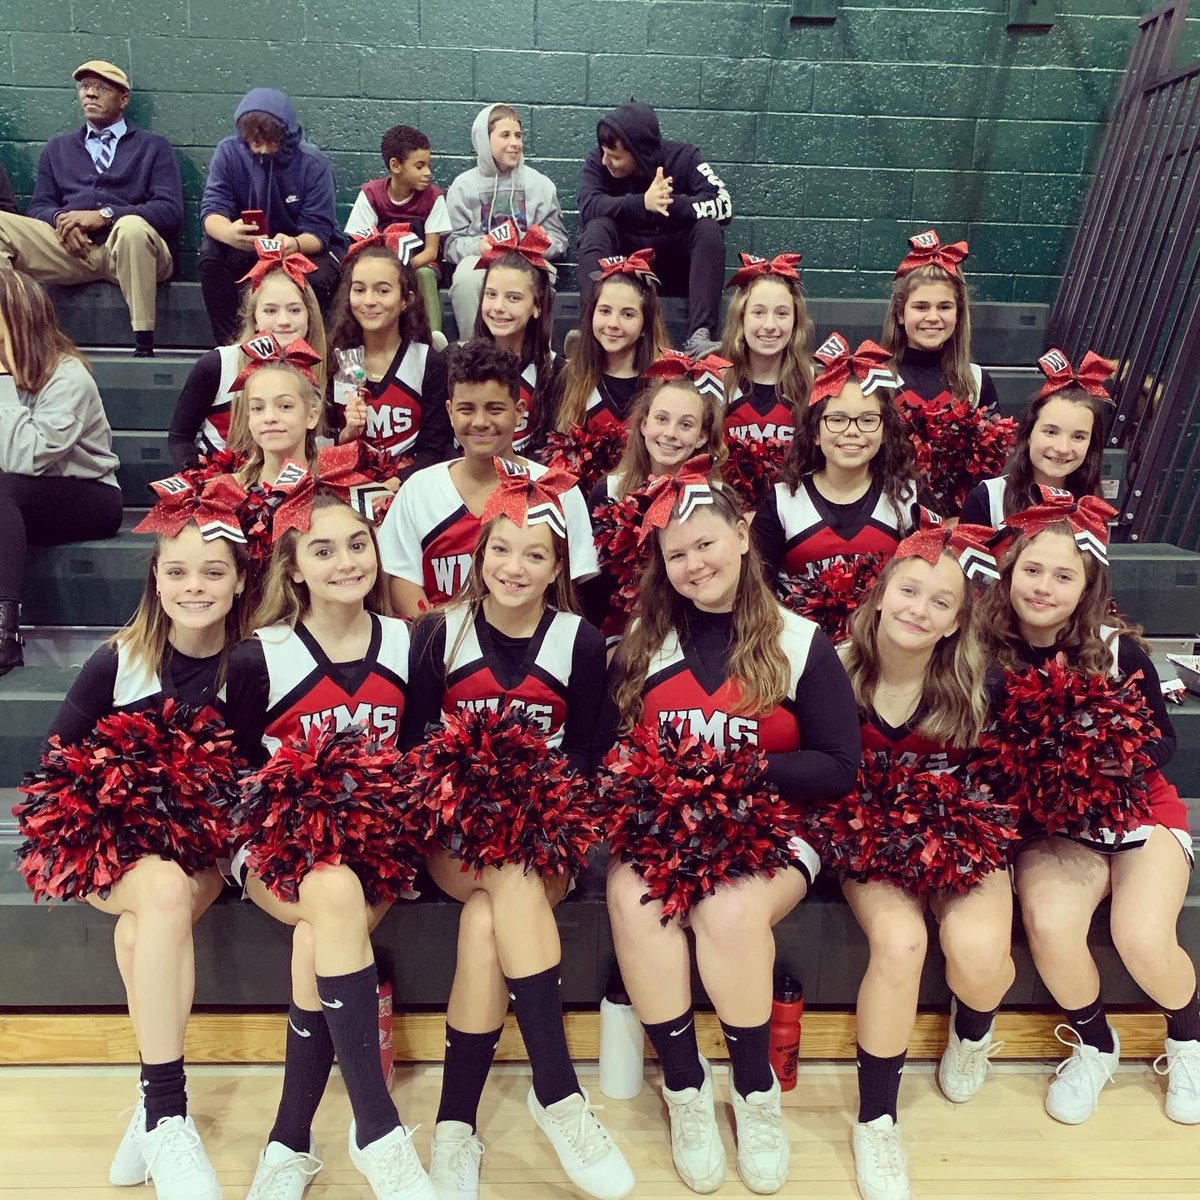 Another great performance by this squad yesterday. ❤️🖤📣 #WMScheer @MrsDuffyWMS @warriors_wms